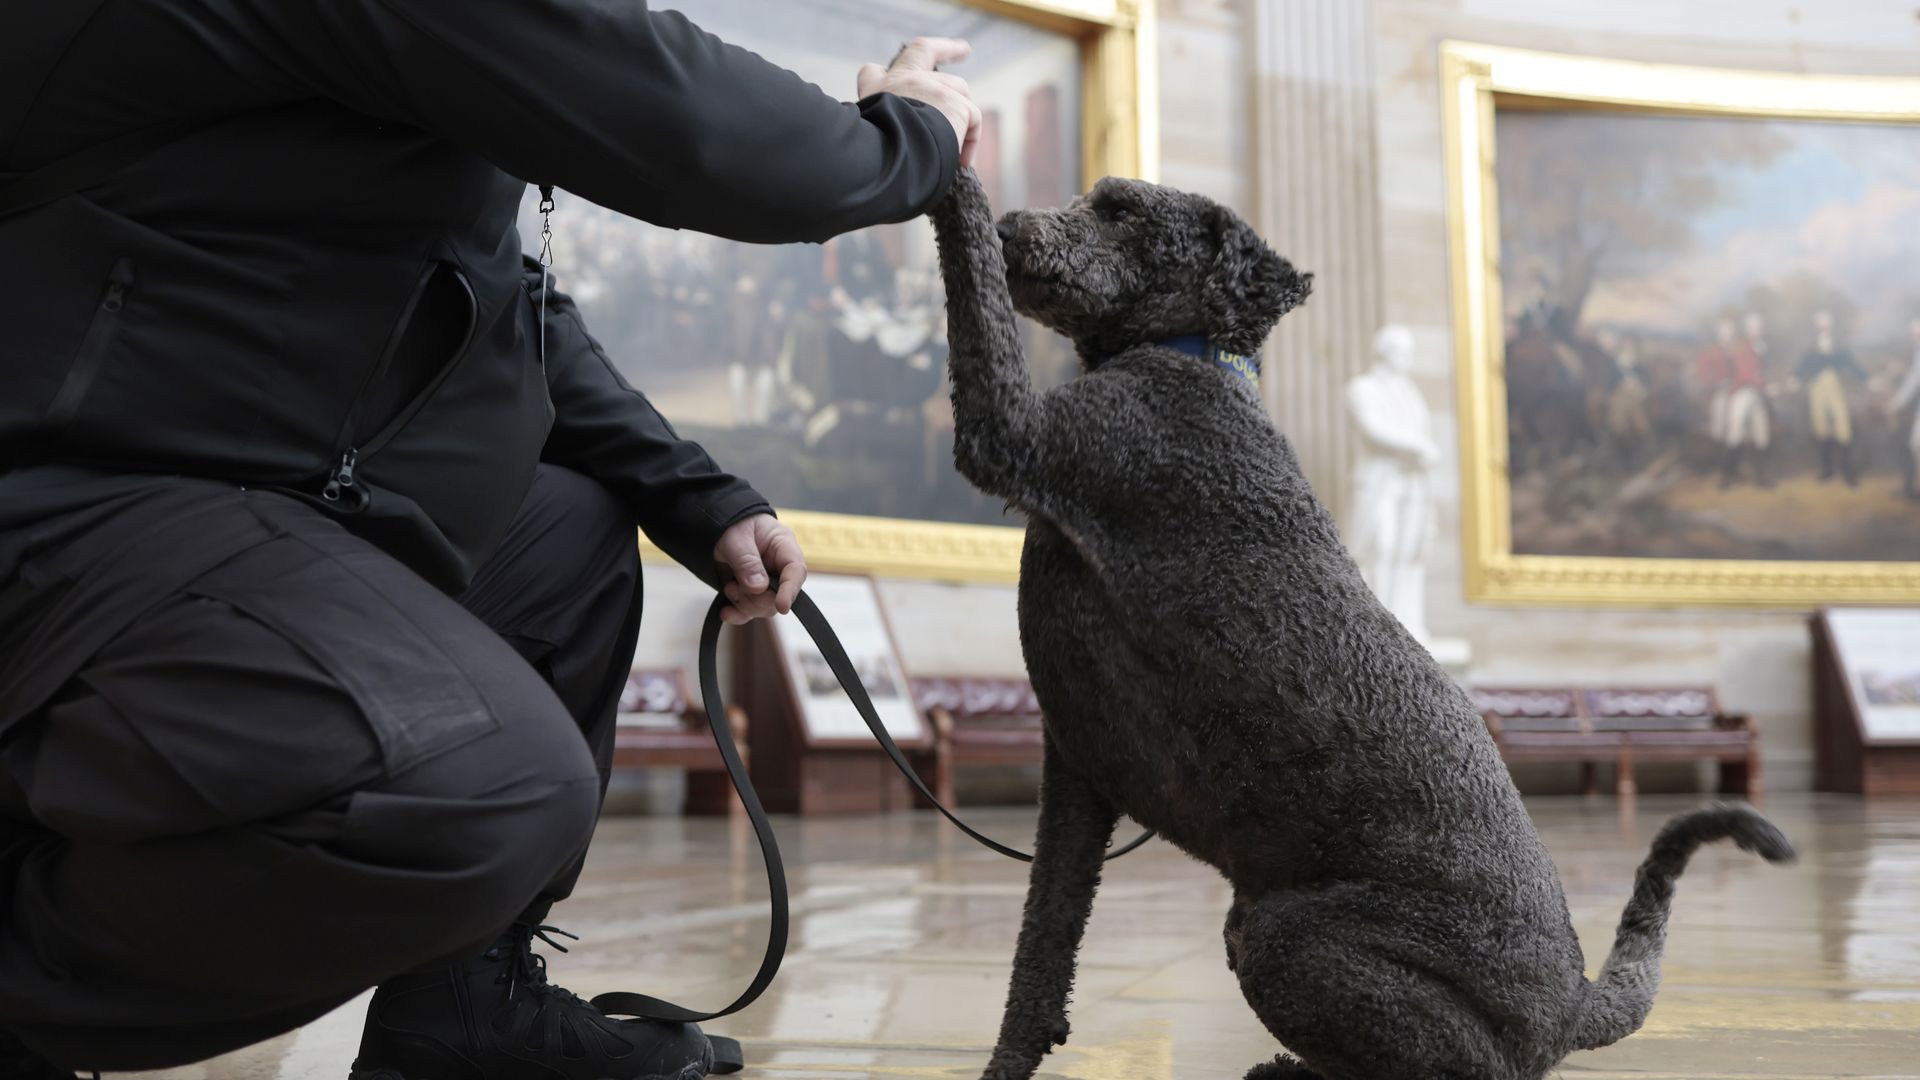 A comfort dog is seen working with its handler in the Rotunda of the U.S. Capitol.